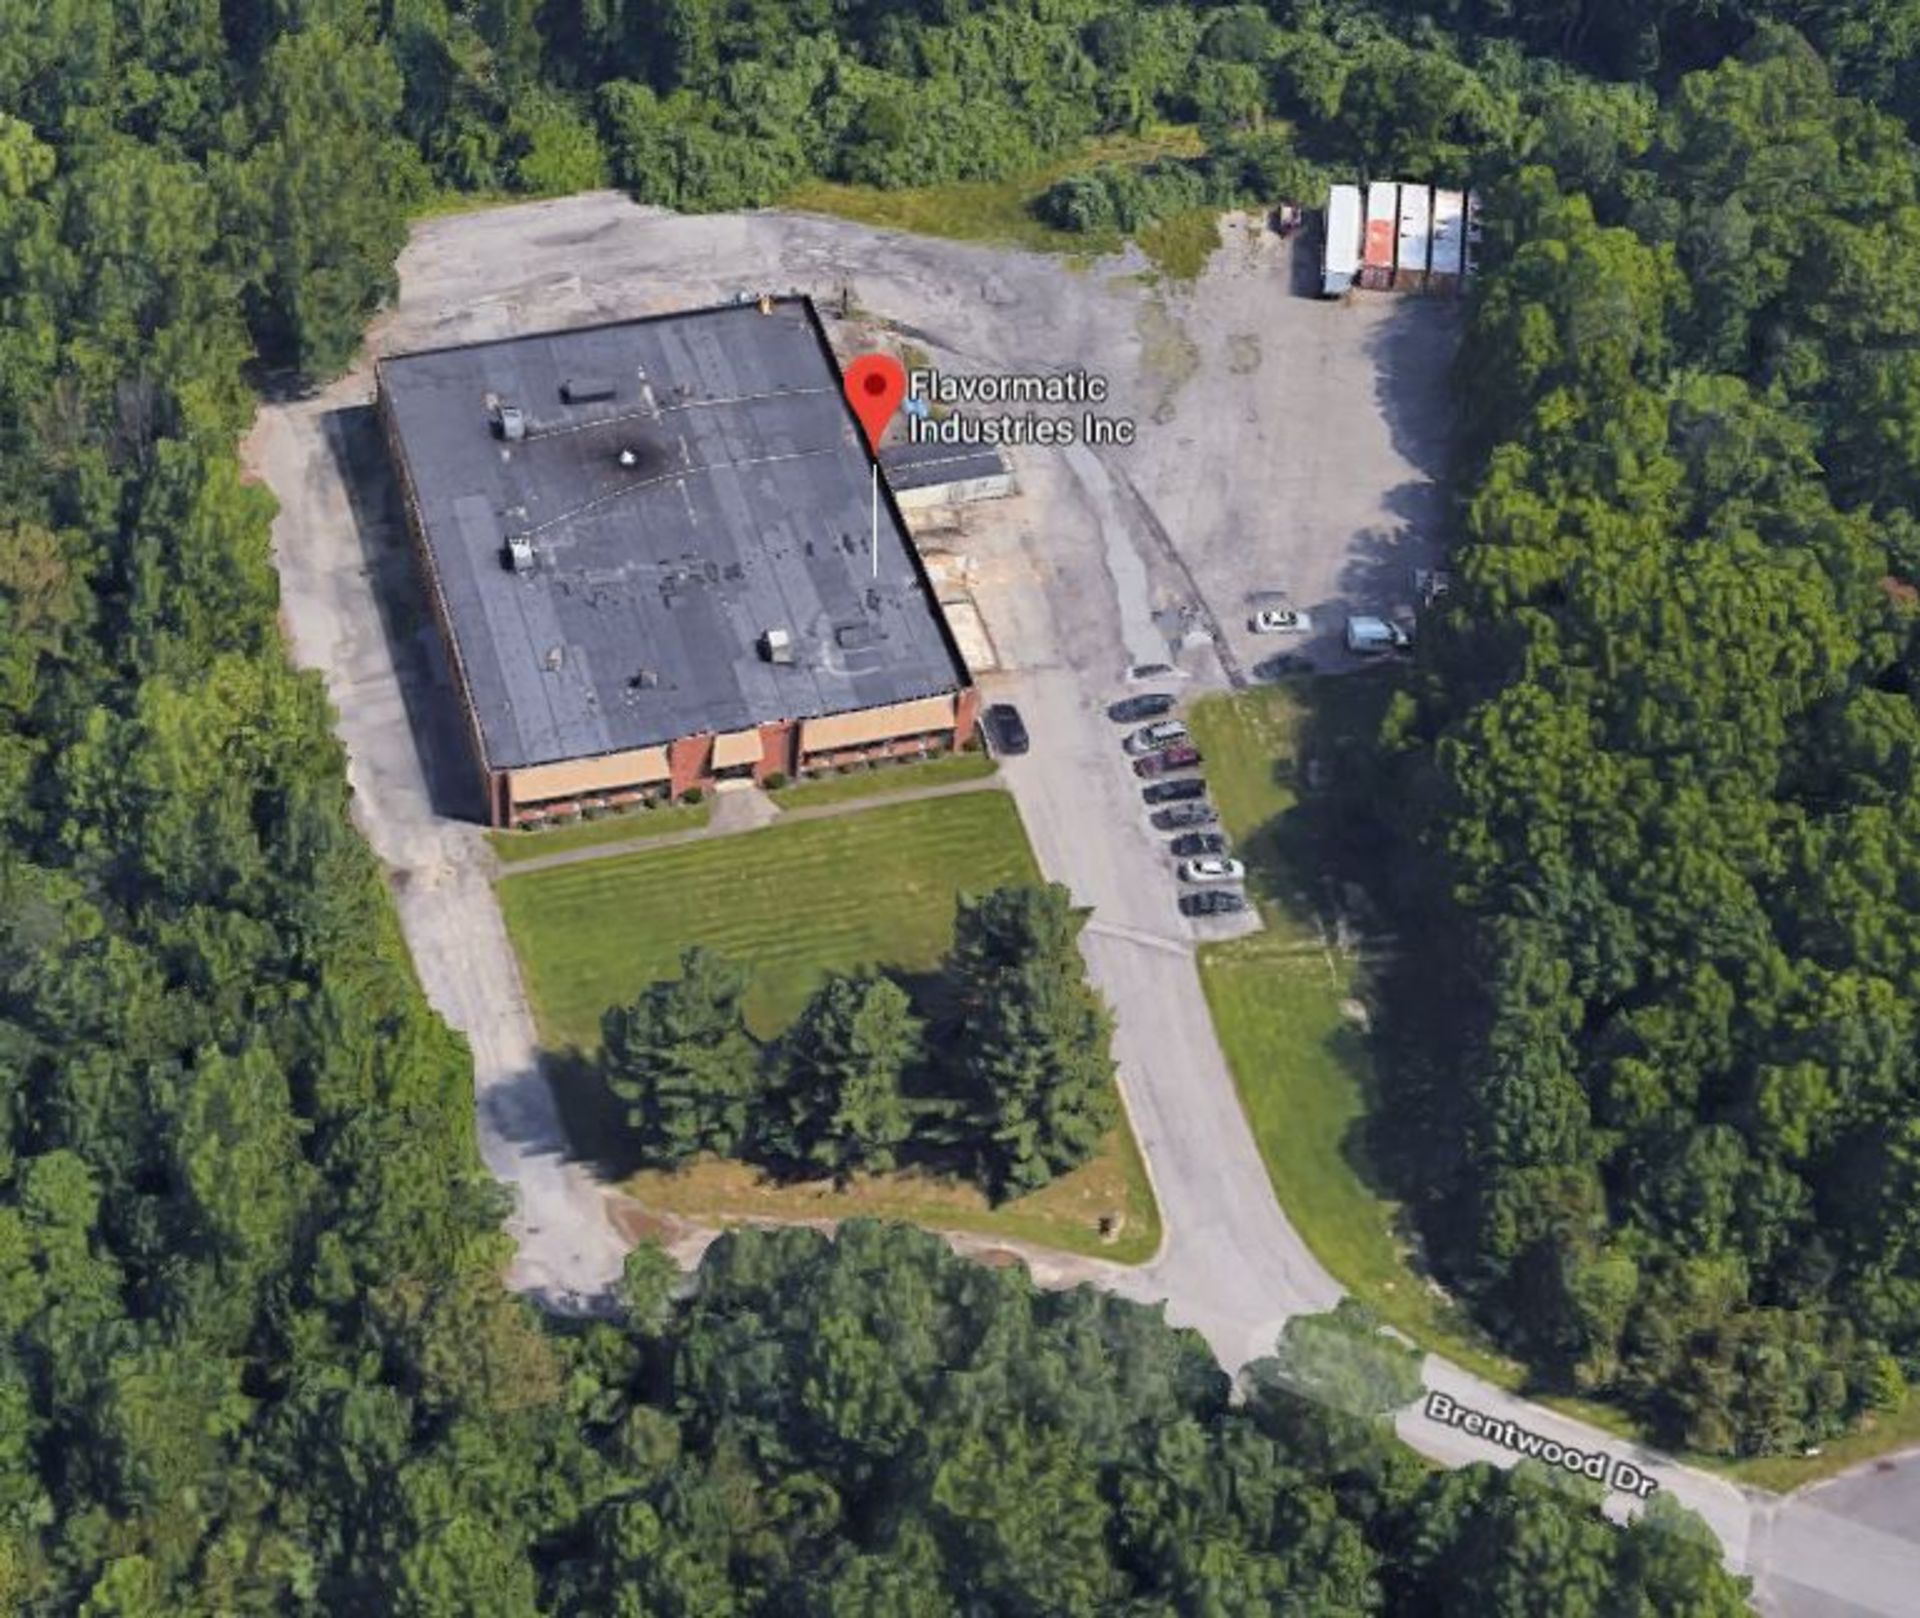 23-ACRES OF REAL PROPERTY - Situate in Dutchess County, NY. Includes 20,120 sq.ft. Building with